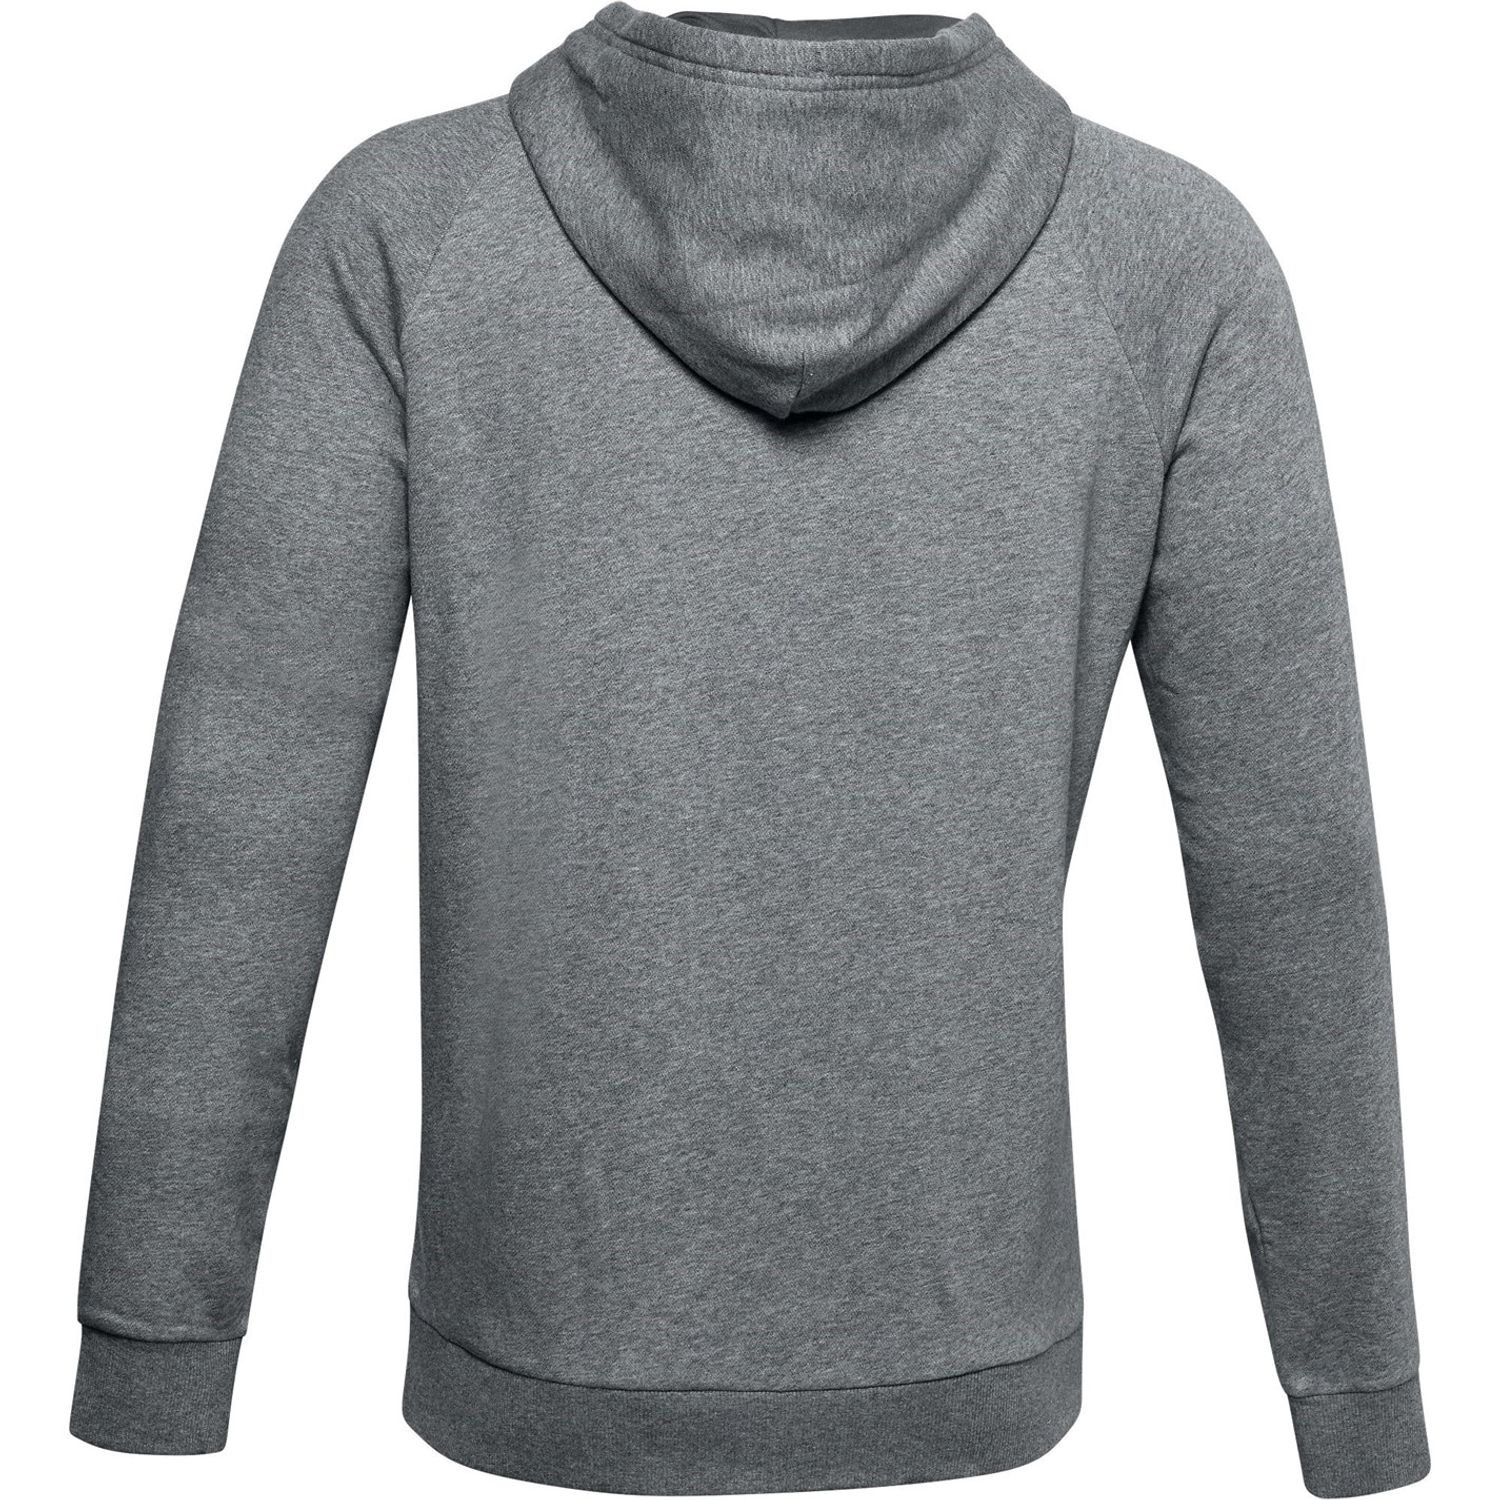 Grey Under Armour Armour Rival Fleece Hoodie - Get The Label